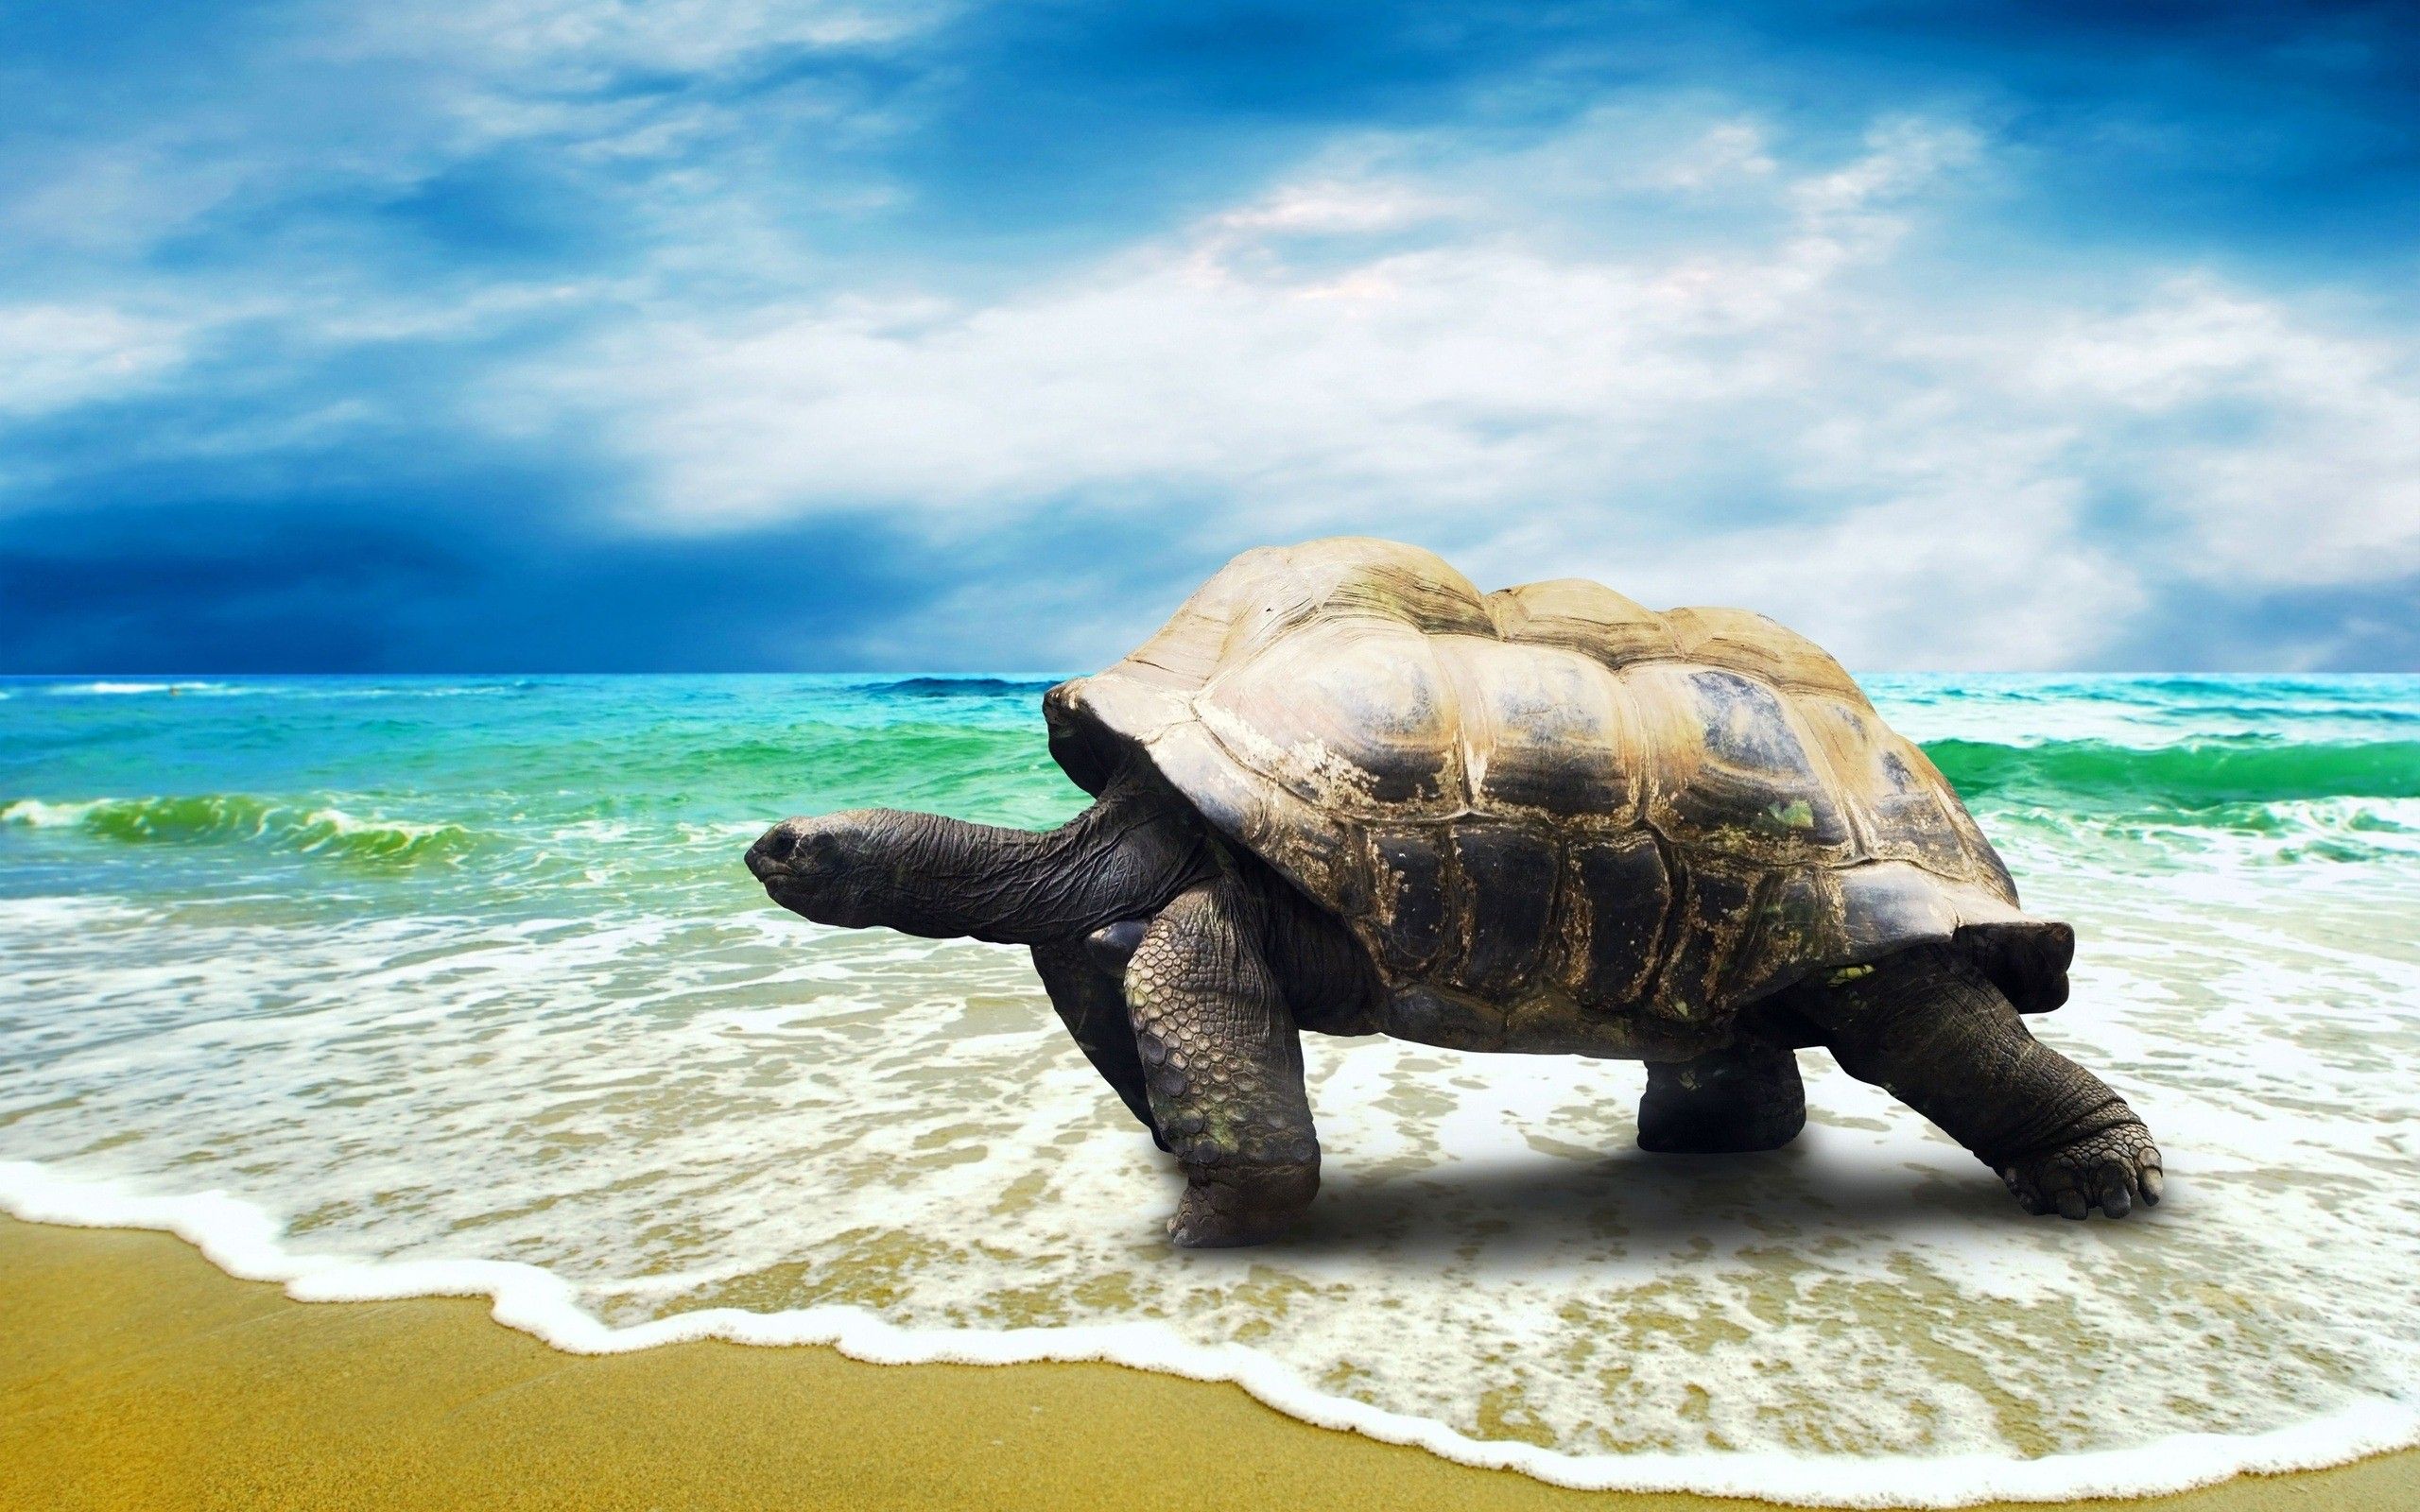 A giant turtle walking on the beach - Turtle